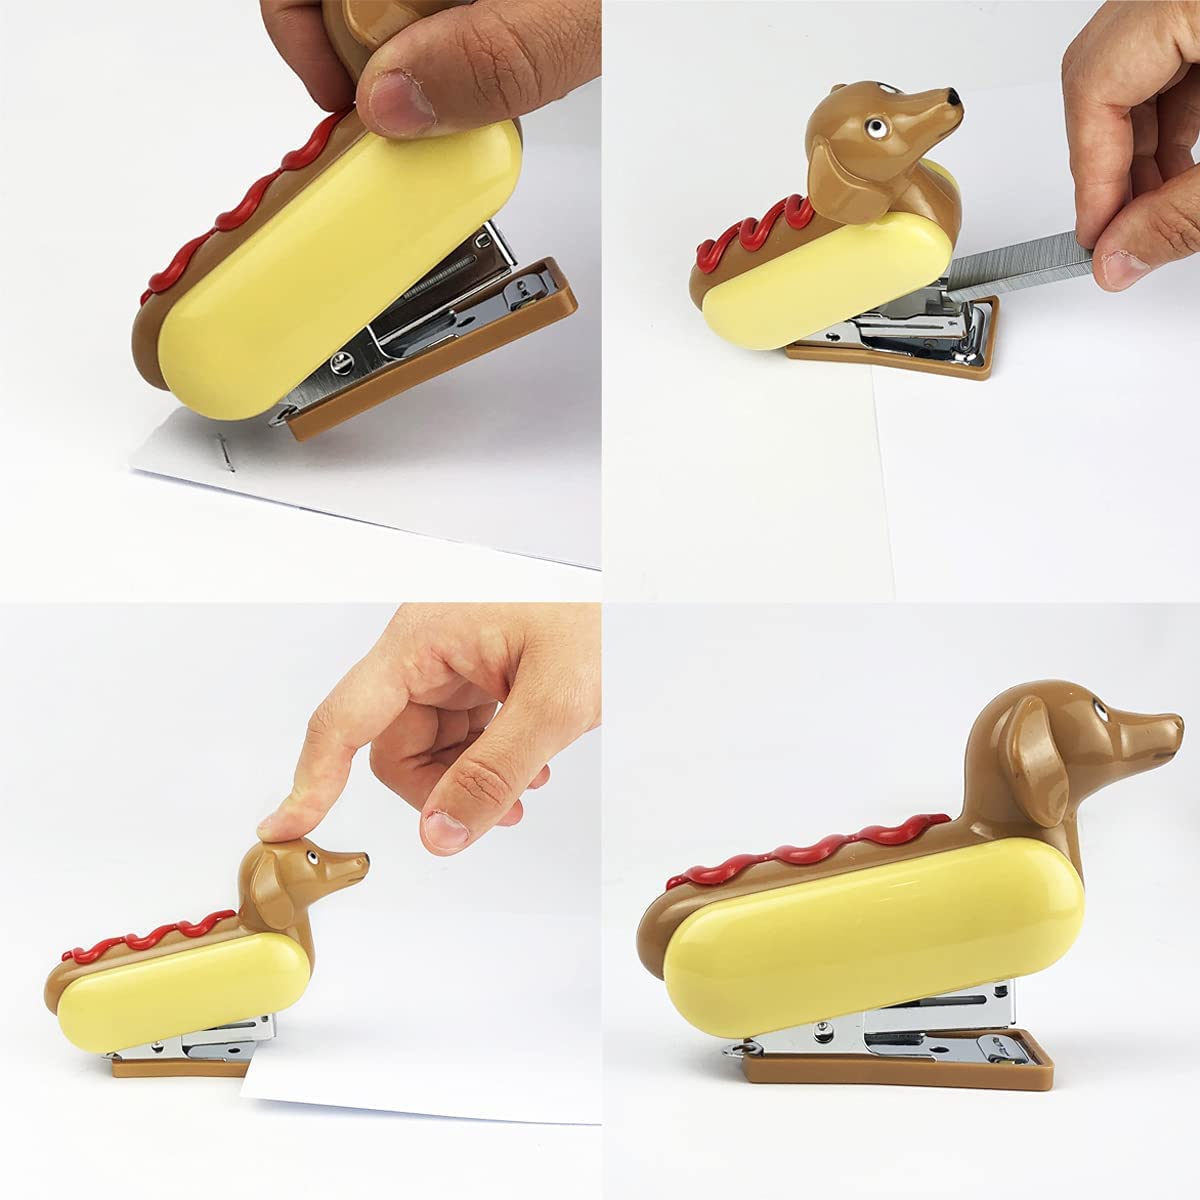 A collage of 4 images showing a hot dog shaped stapler.